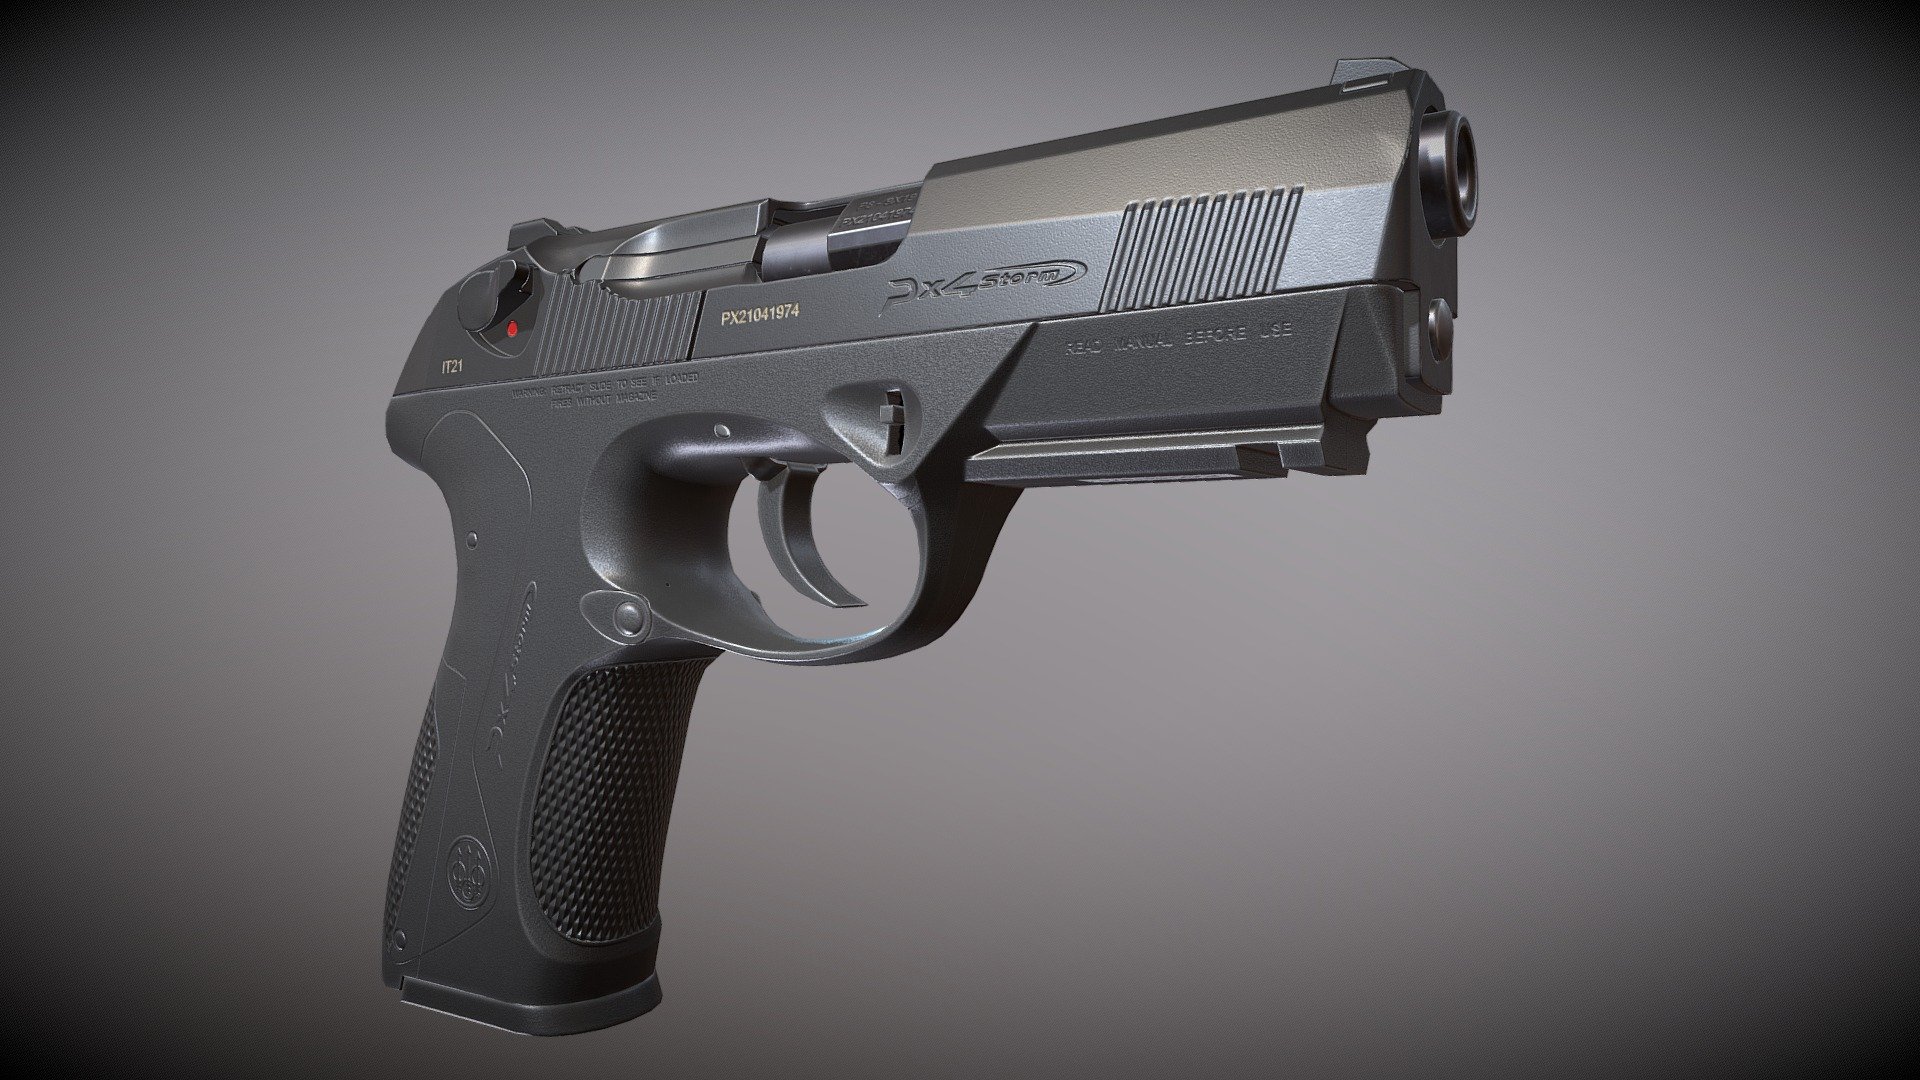 The Beretta Px4 Storm is a semi-automatic pistol manufactured by Beretta of Italy and intended for personal defense and law enforcement use.
Low-poly pbr-game-ready model

Textures 4k PBR Metallic Roughness

high poly modeling done in blender and ZBrush

Low poly done in blender

Textured in Substance painter, baked and rendered using Marmoset Toolbag 4 - Beretta Px4 Storm - Buy Royalty Free 3D model by Wallerion 3d model